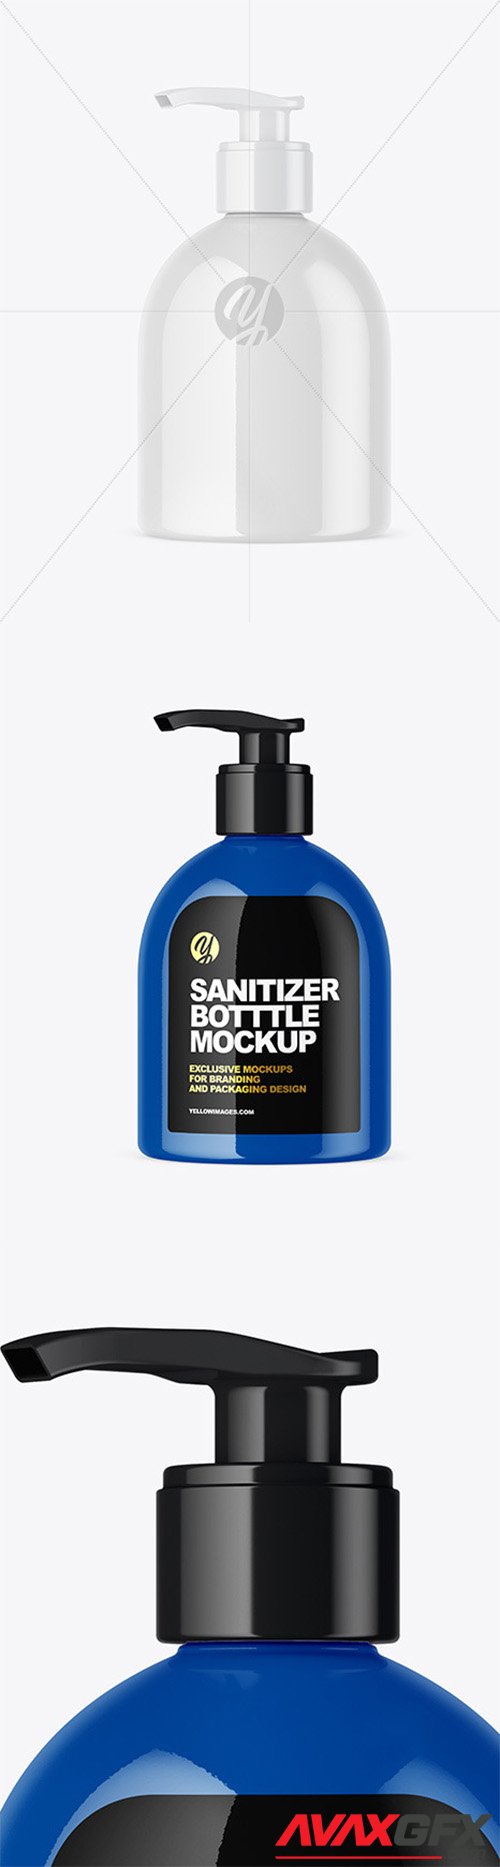 Download Glossy Sanitizer Bottle Mockup 60269 Avaxgfx All Downloads That You Need In One Place Graphic From Nitroflare Rapidgator